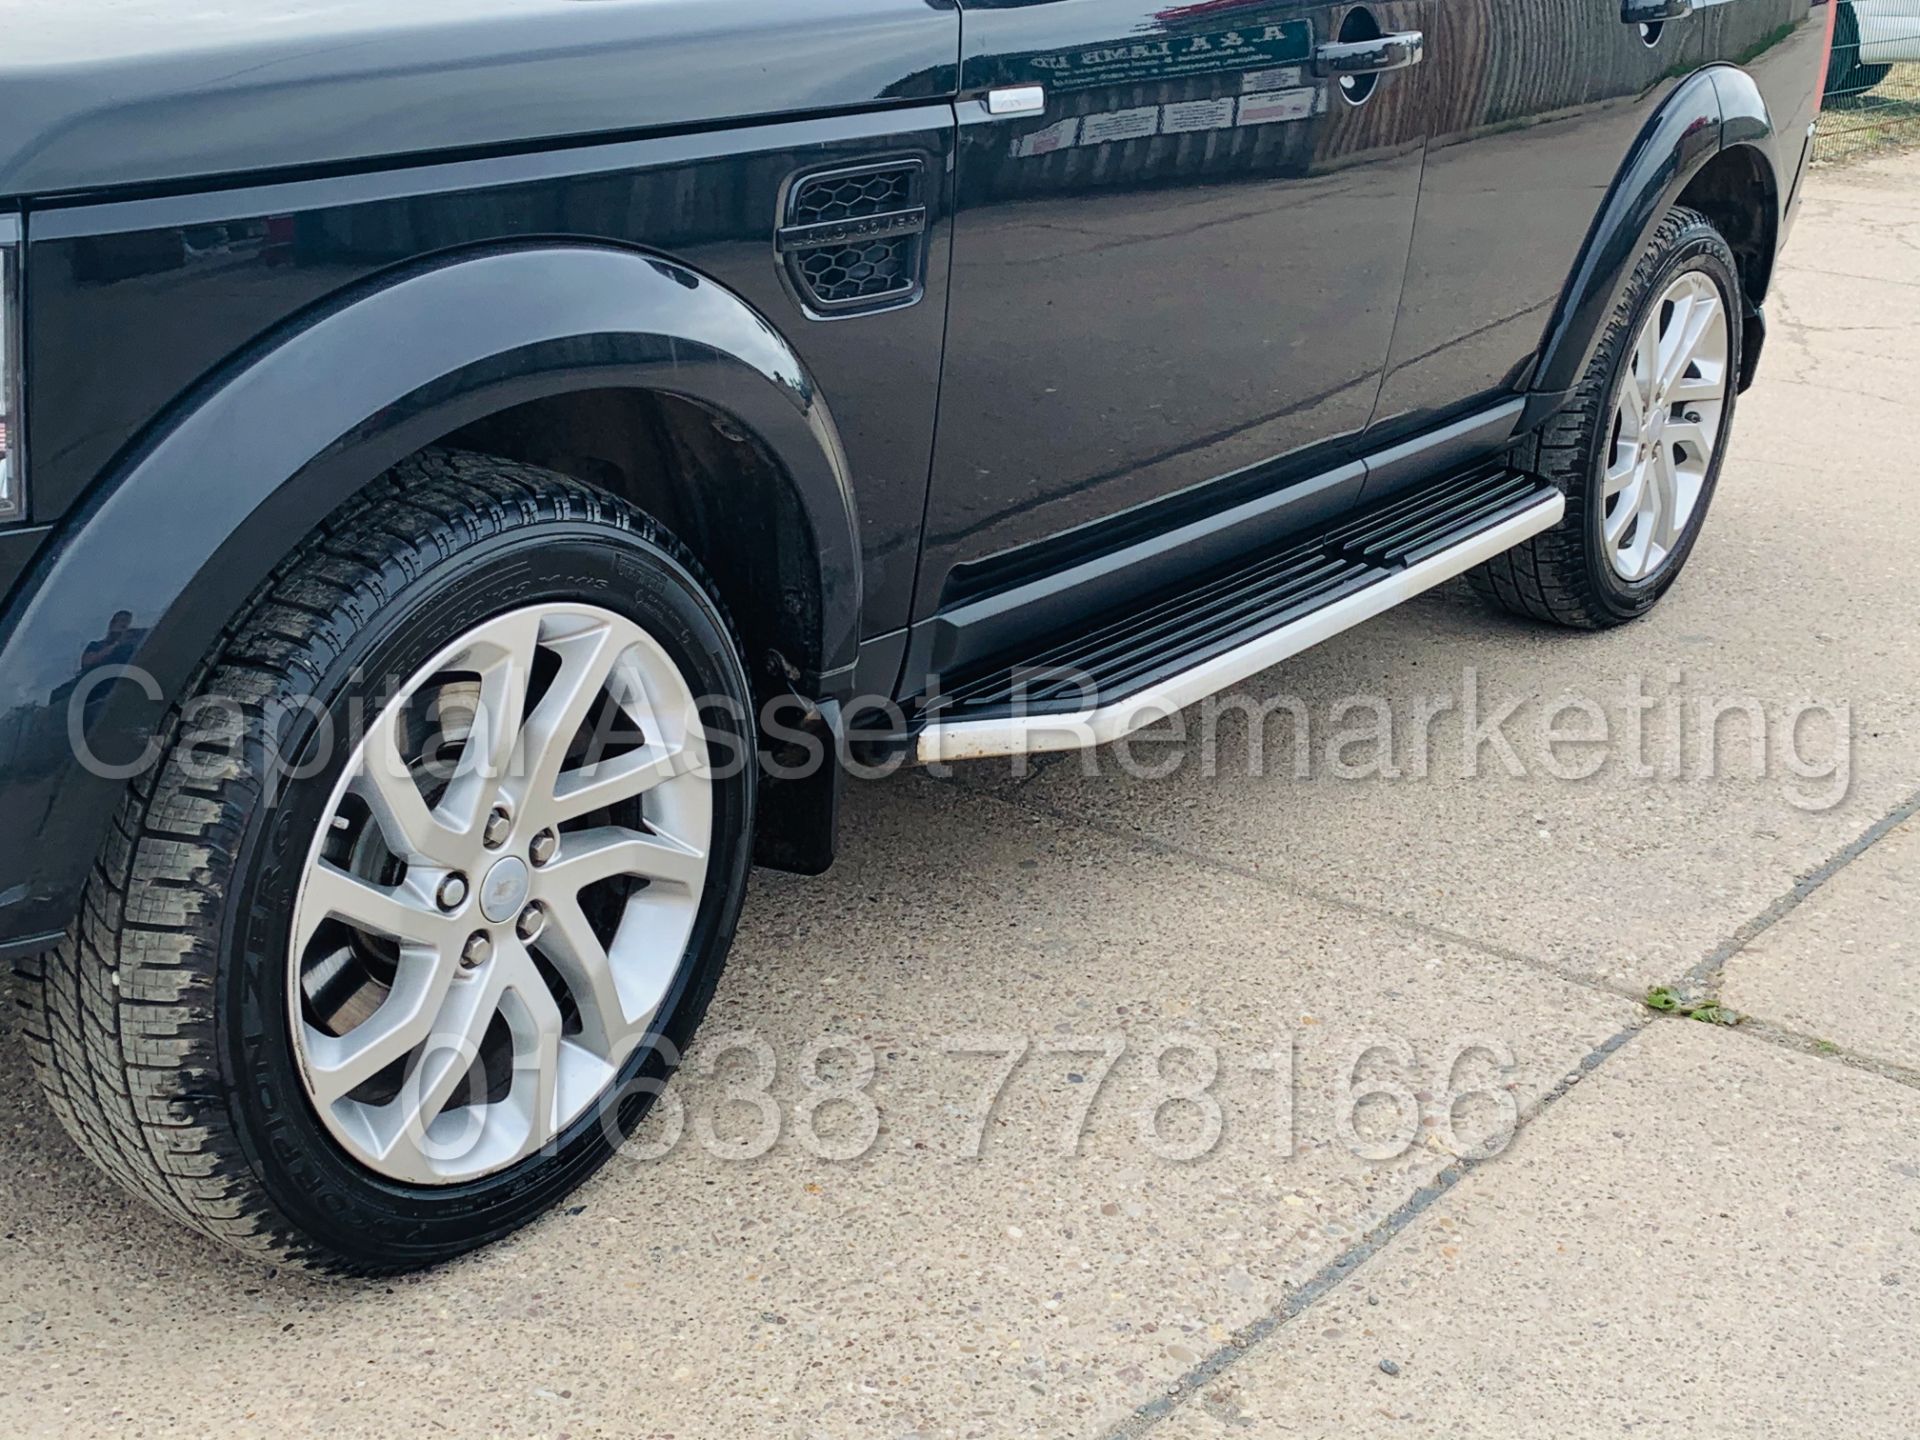 (On Sale) LAND ROVER DISCOVERY 4 *LANDMARK* 7 SEATER SUV (2016) '3.0 SDV6 - 8 SPEED AUTO' (1 OWNER) - Image 18 of 65